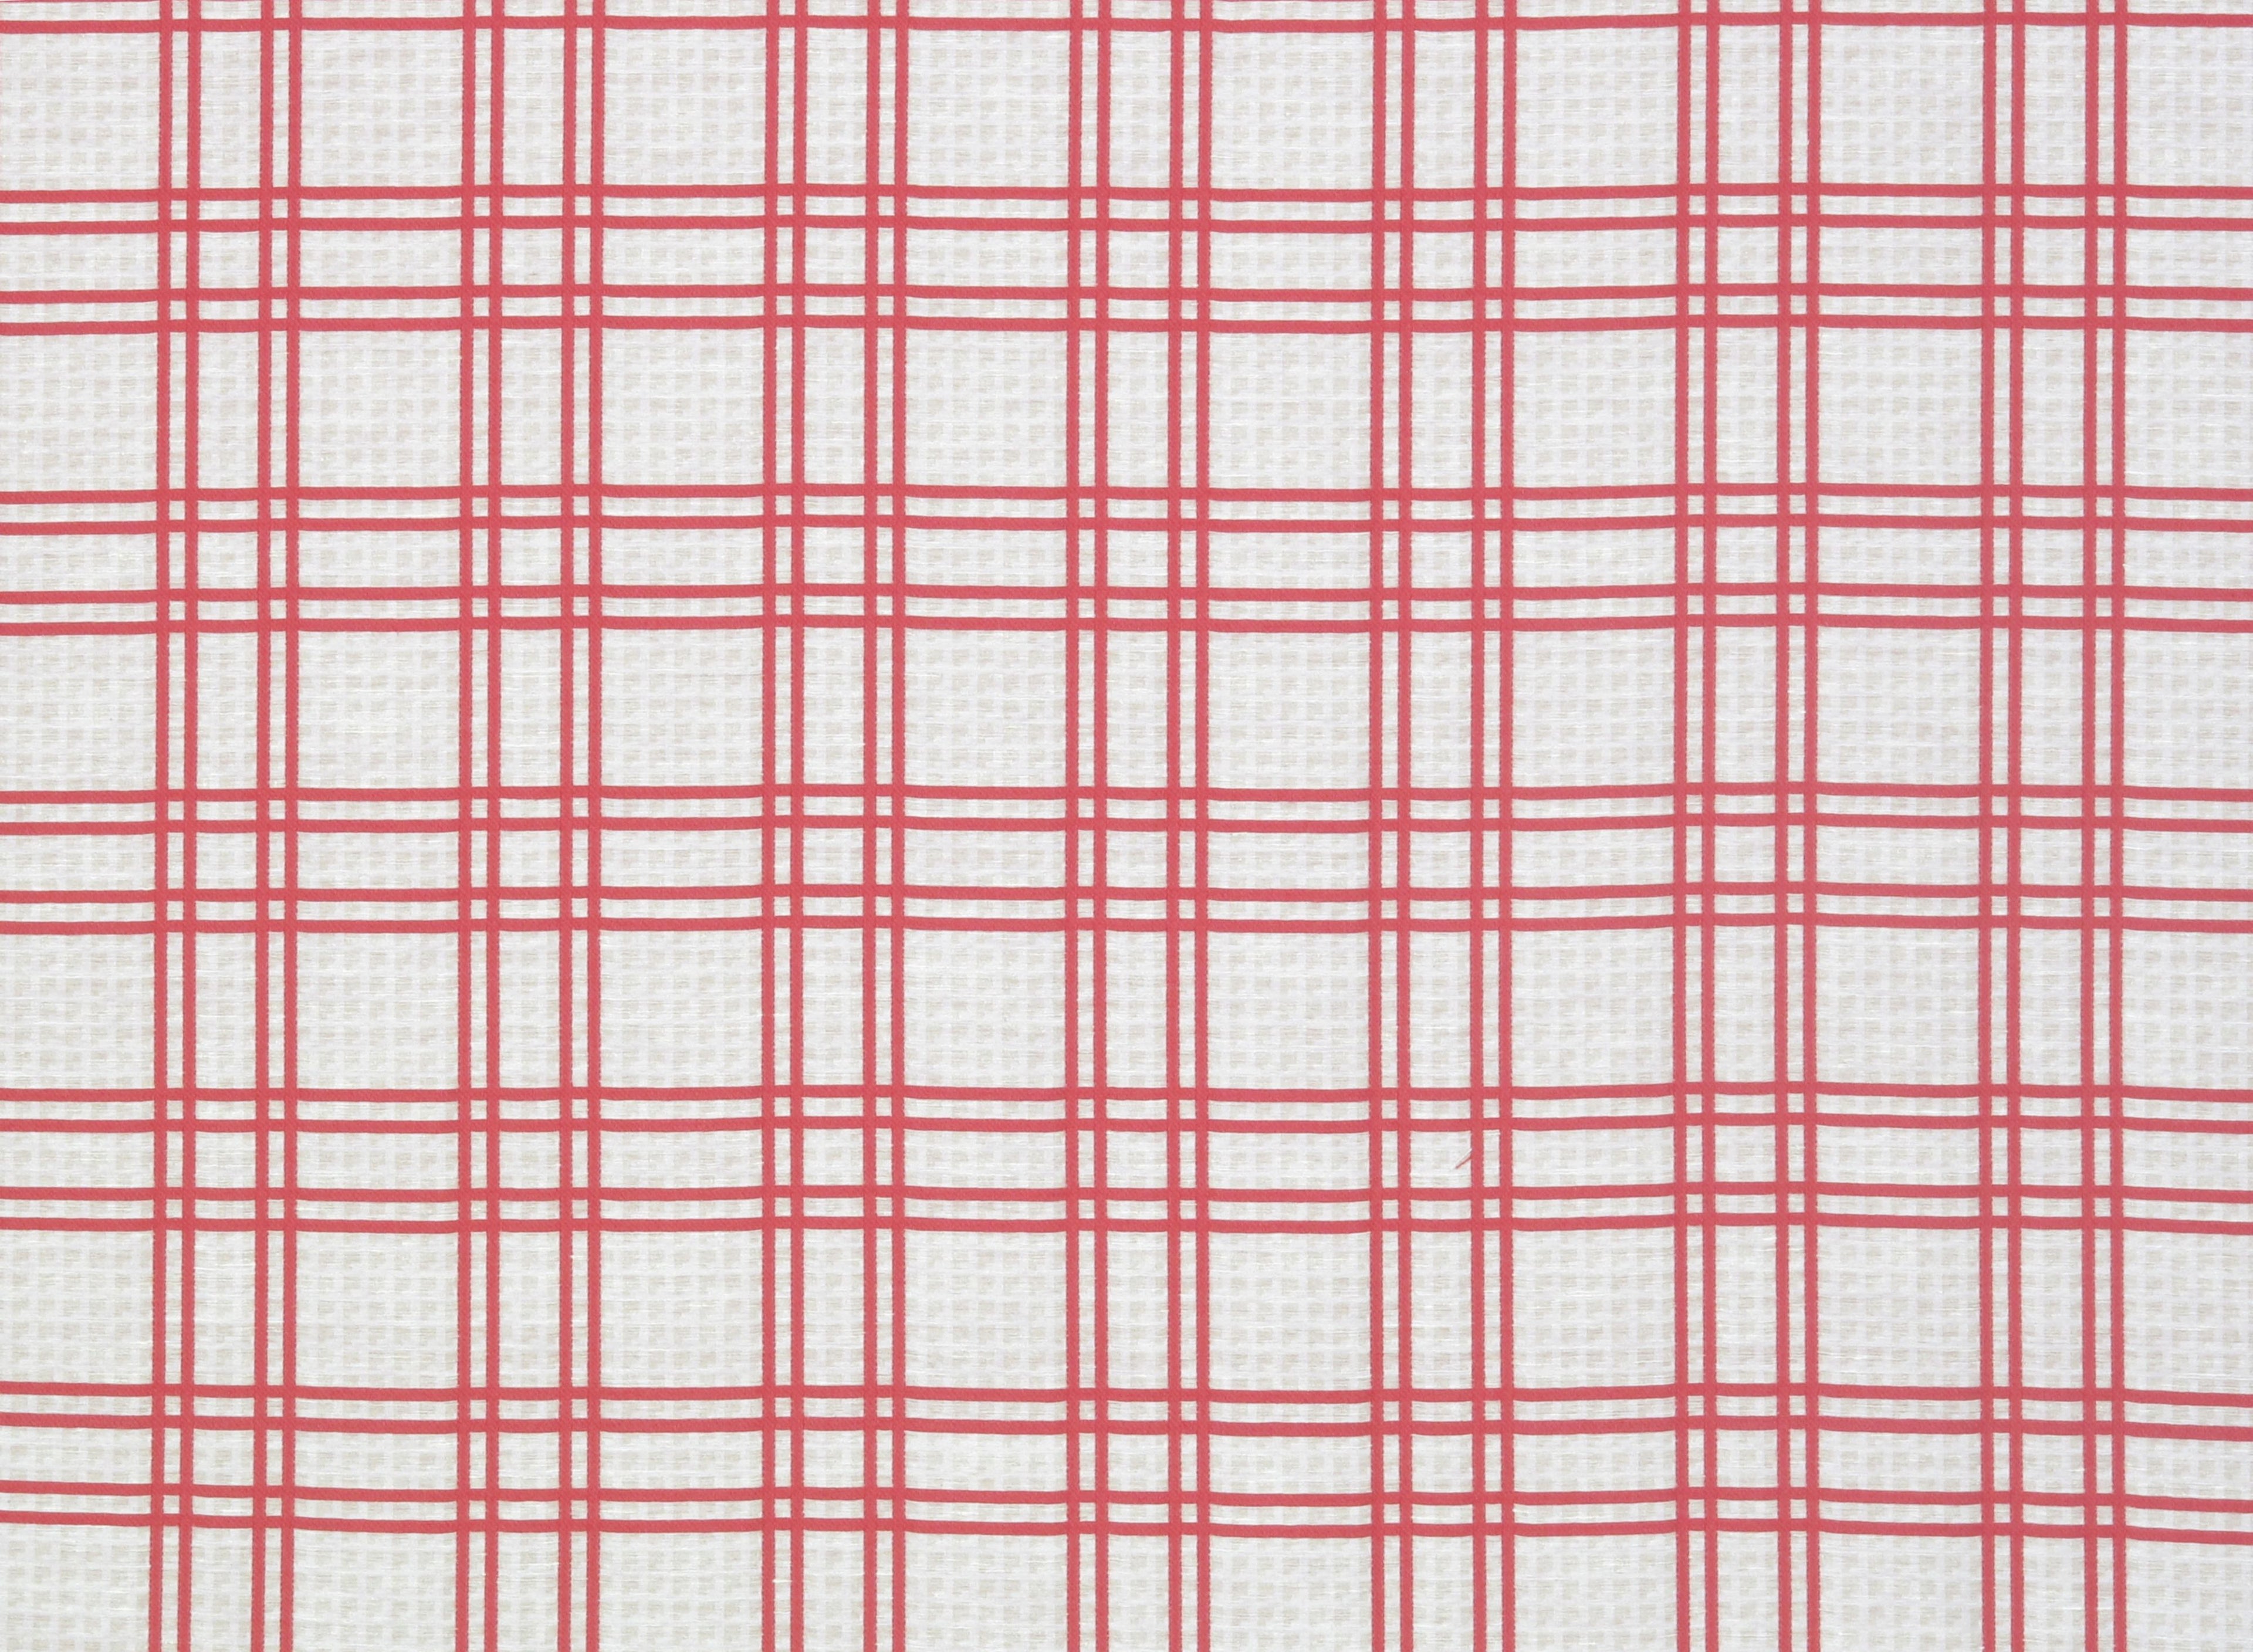 Wellesley fabric in azalea color - pattern number M8 00032489 - by Scalamandre in the Old World Weavers collection